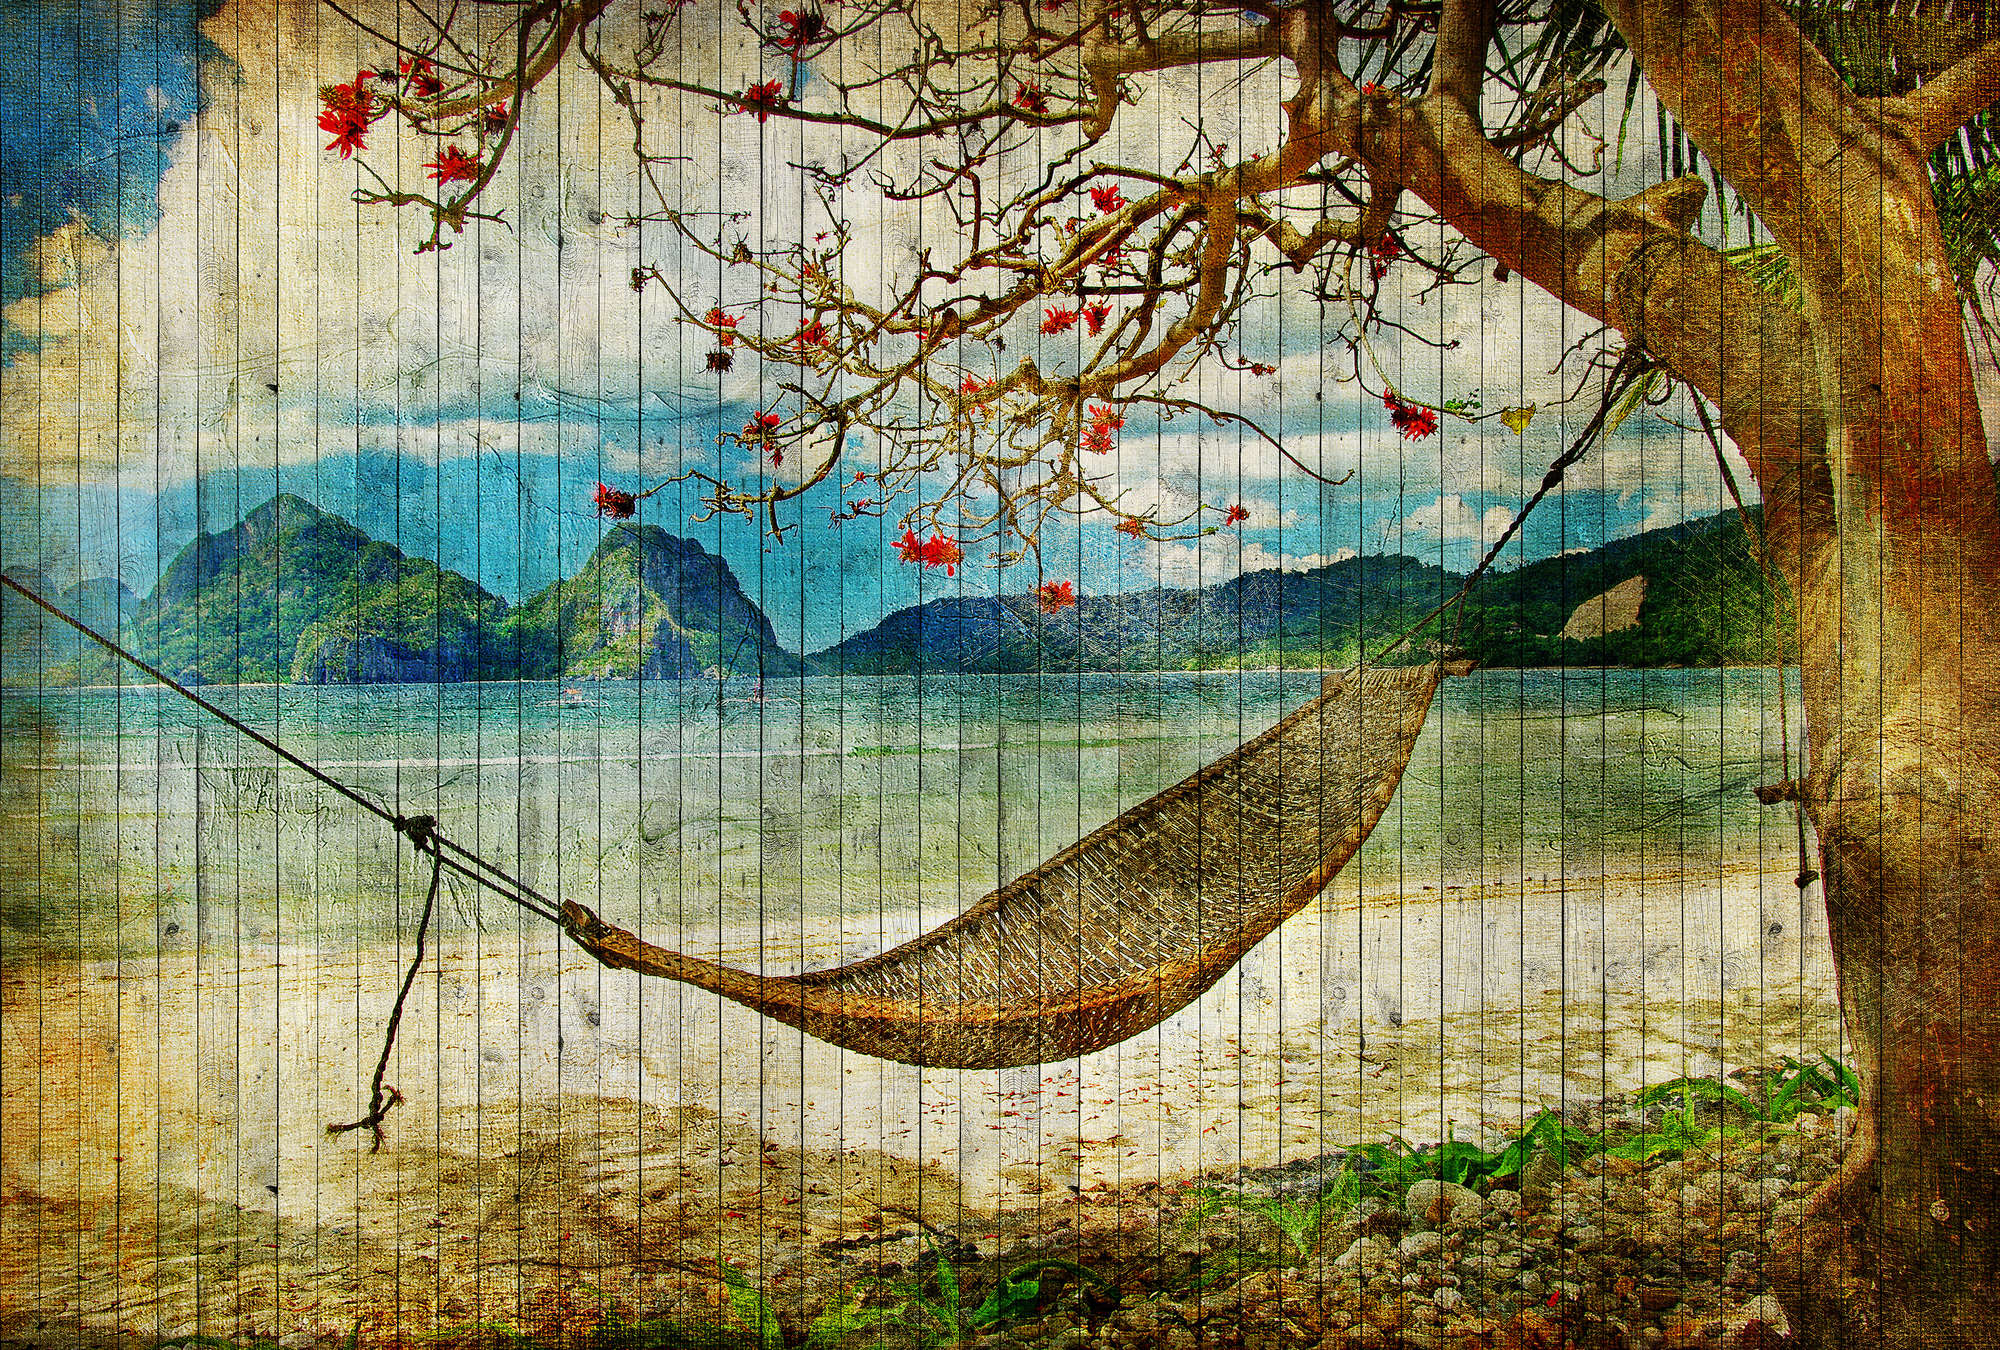             Tahiti 2 - Wooden panel mural with hammock & South Seas beach - Beige, Blue | Textured non-woven
        